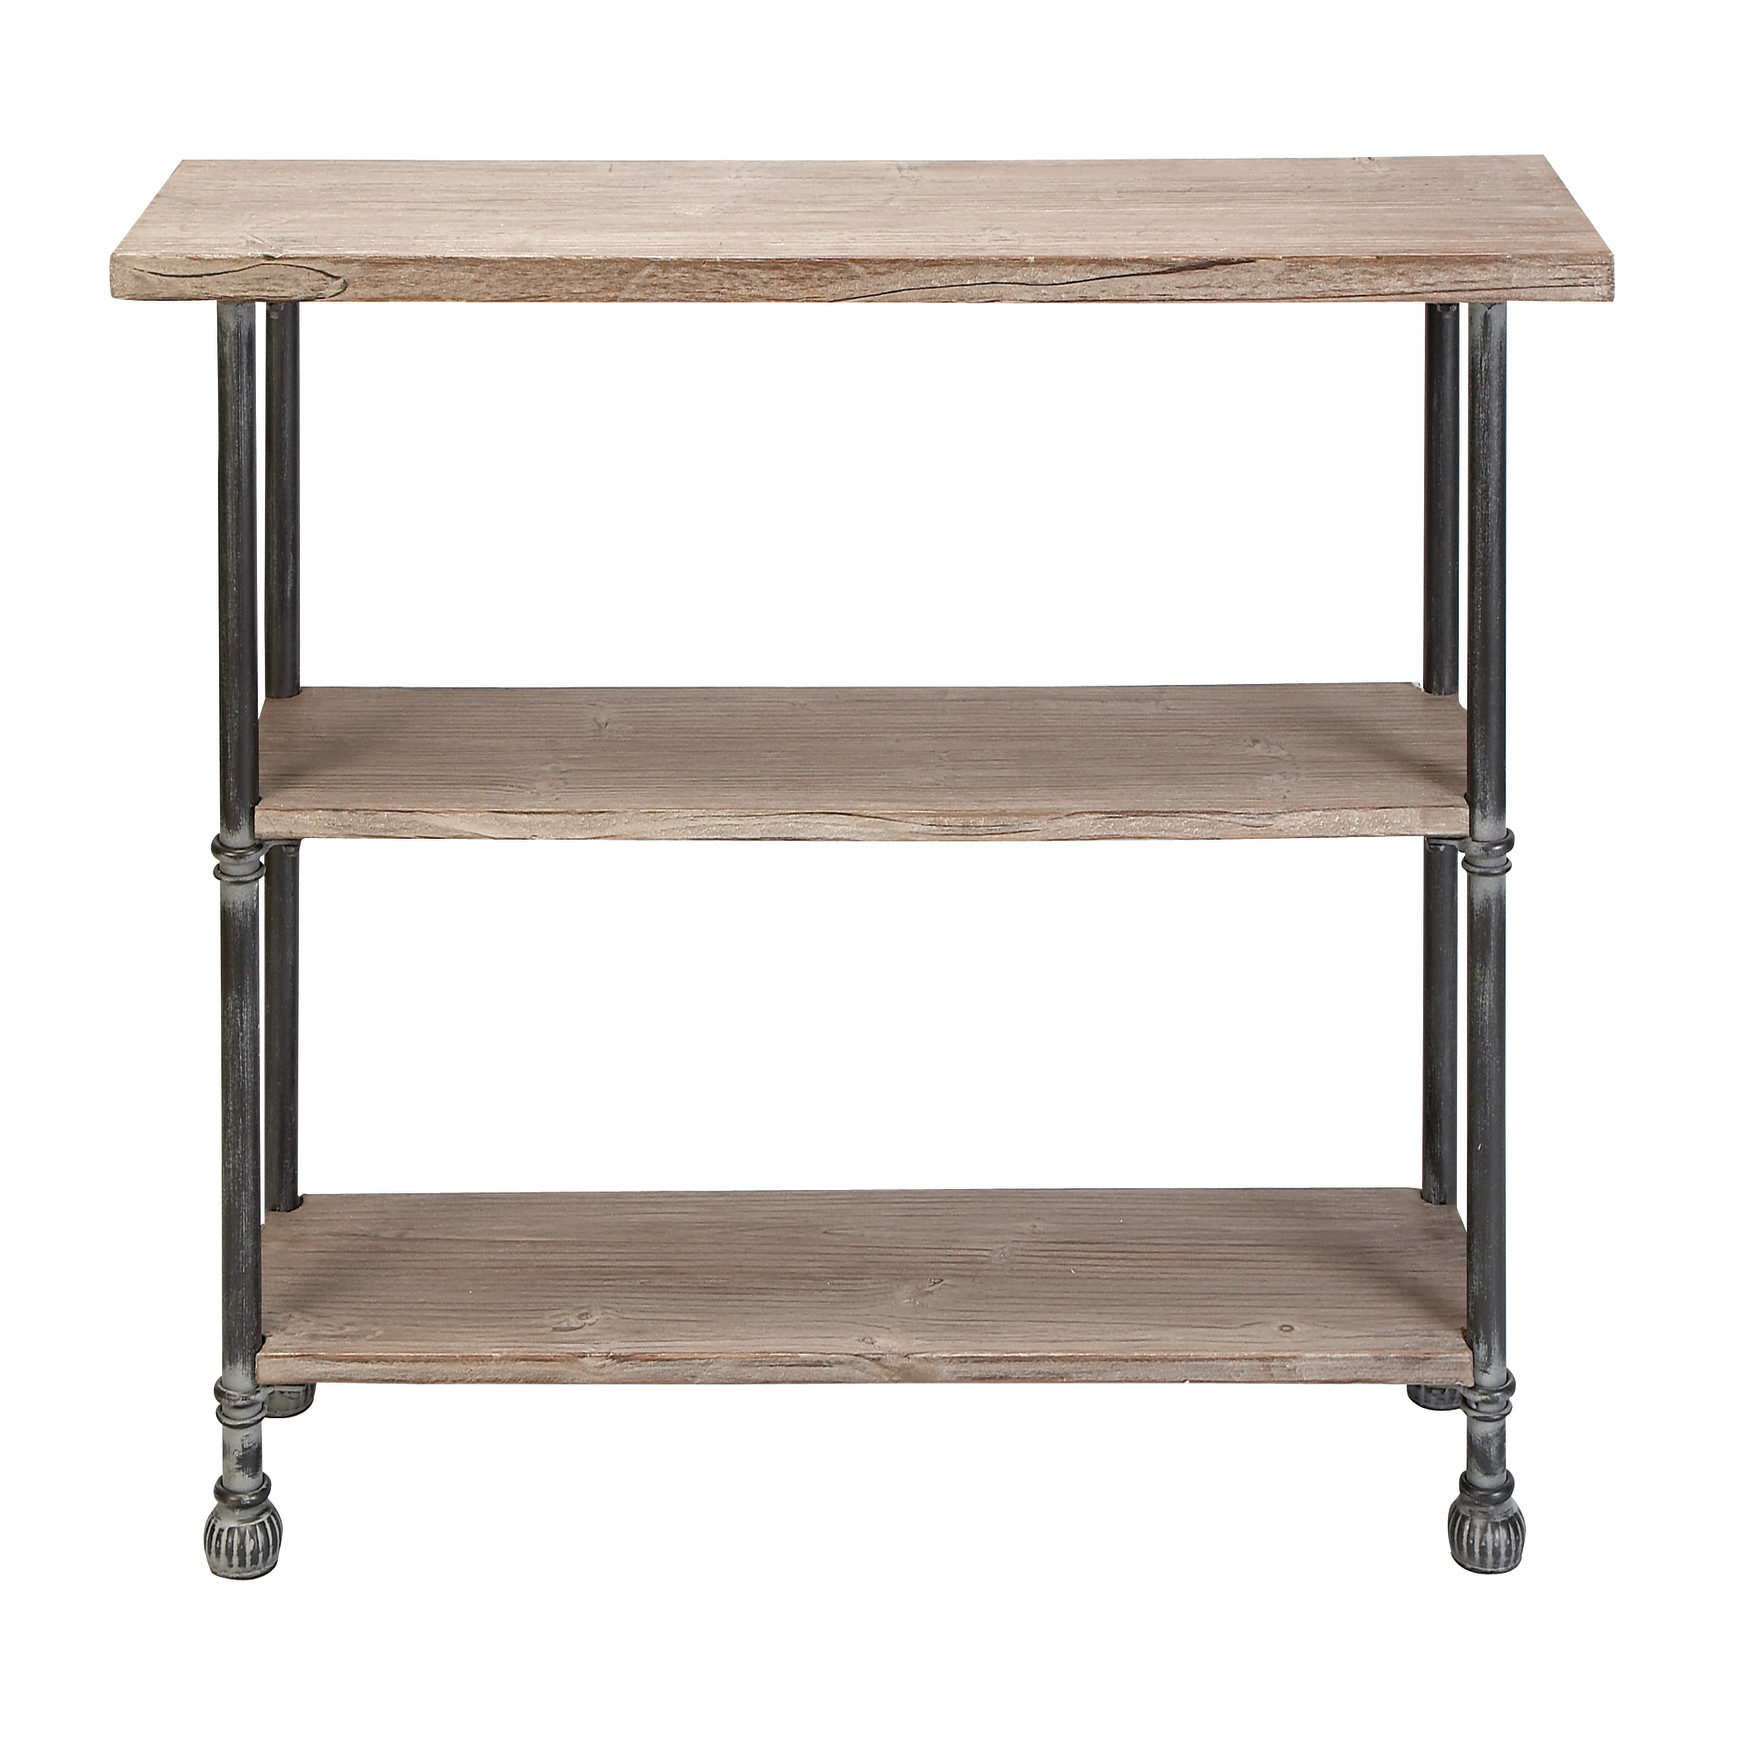 Brown Industrial Wood Console Table, 32 x 48, WHITE